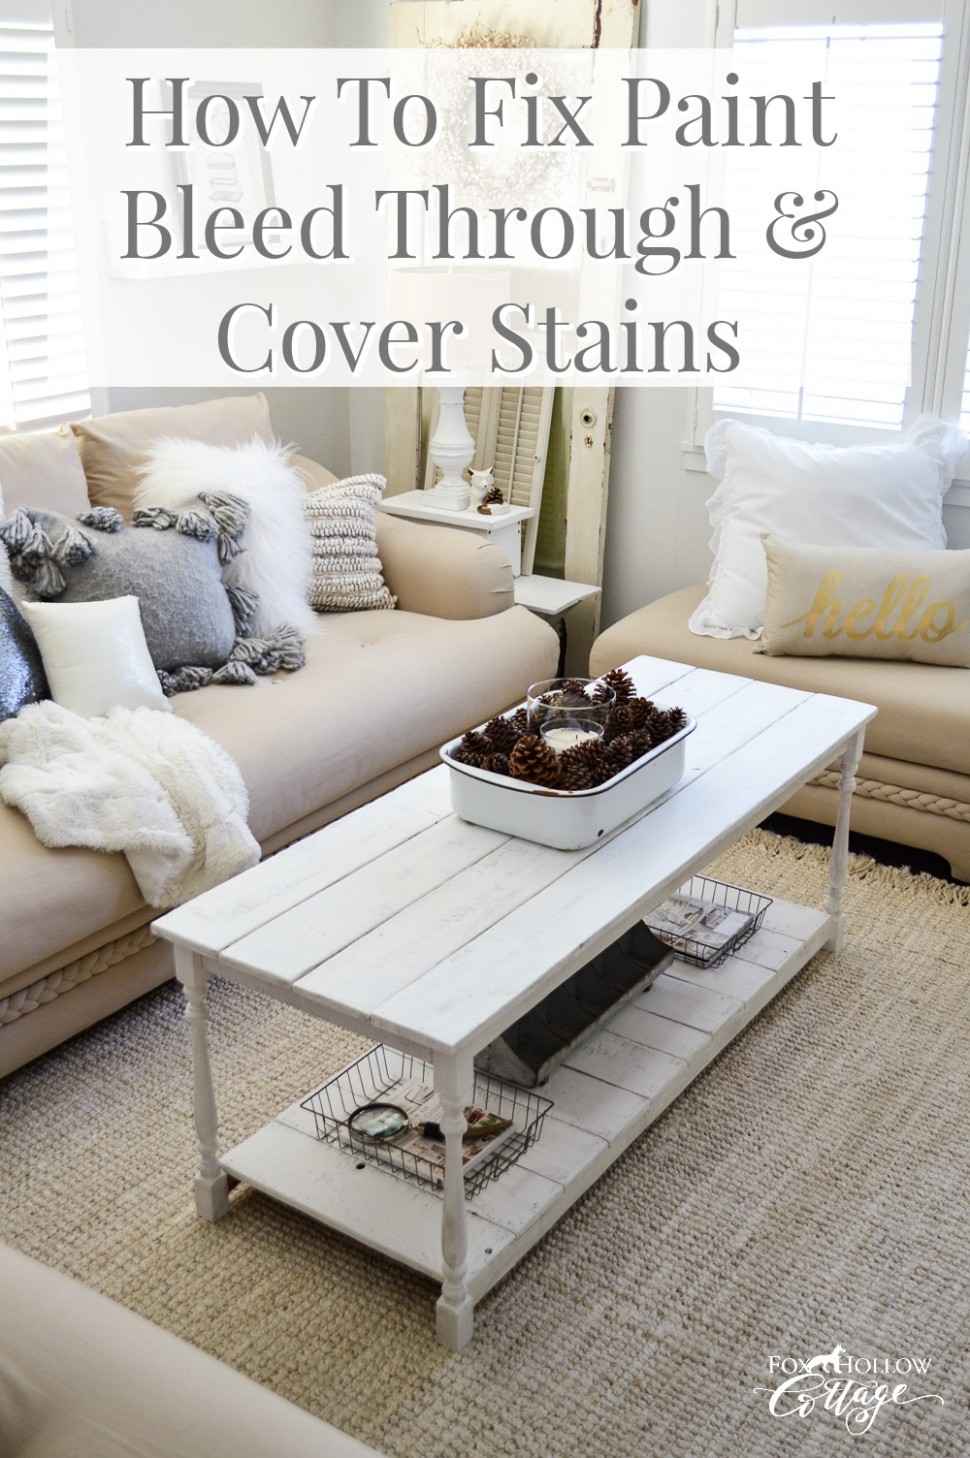 How To Fix Paint Bleed Through And Cover Stains Can You Paint Chalk Paint Over Stain